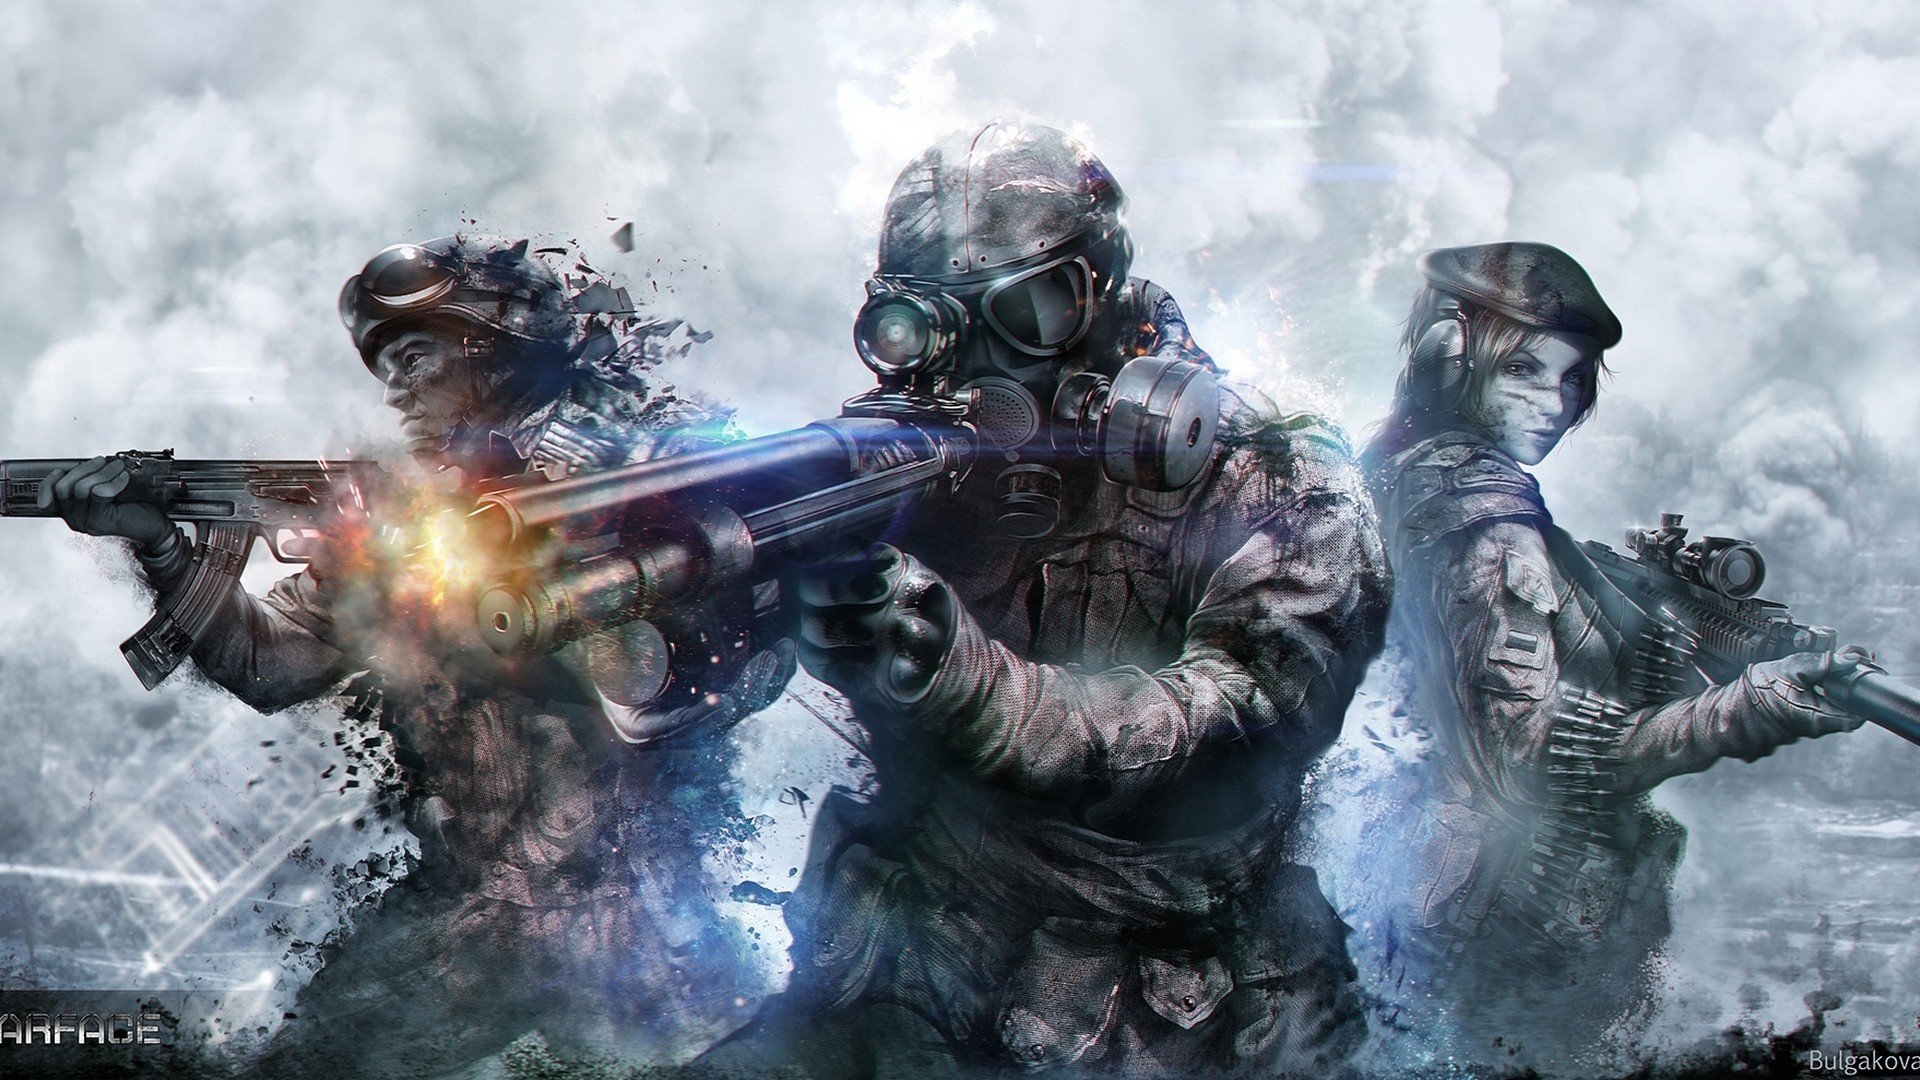 man, Woman, Weapon, Soliders, Army, Video, Game Wallpaper